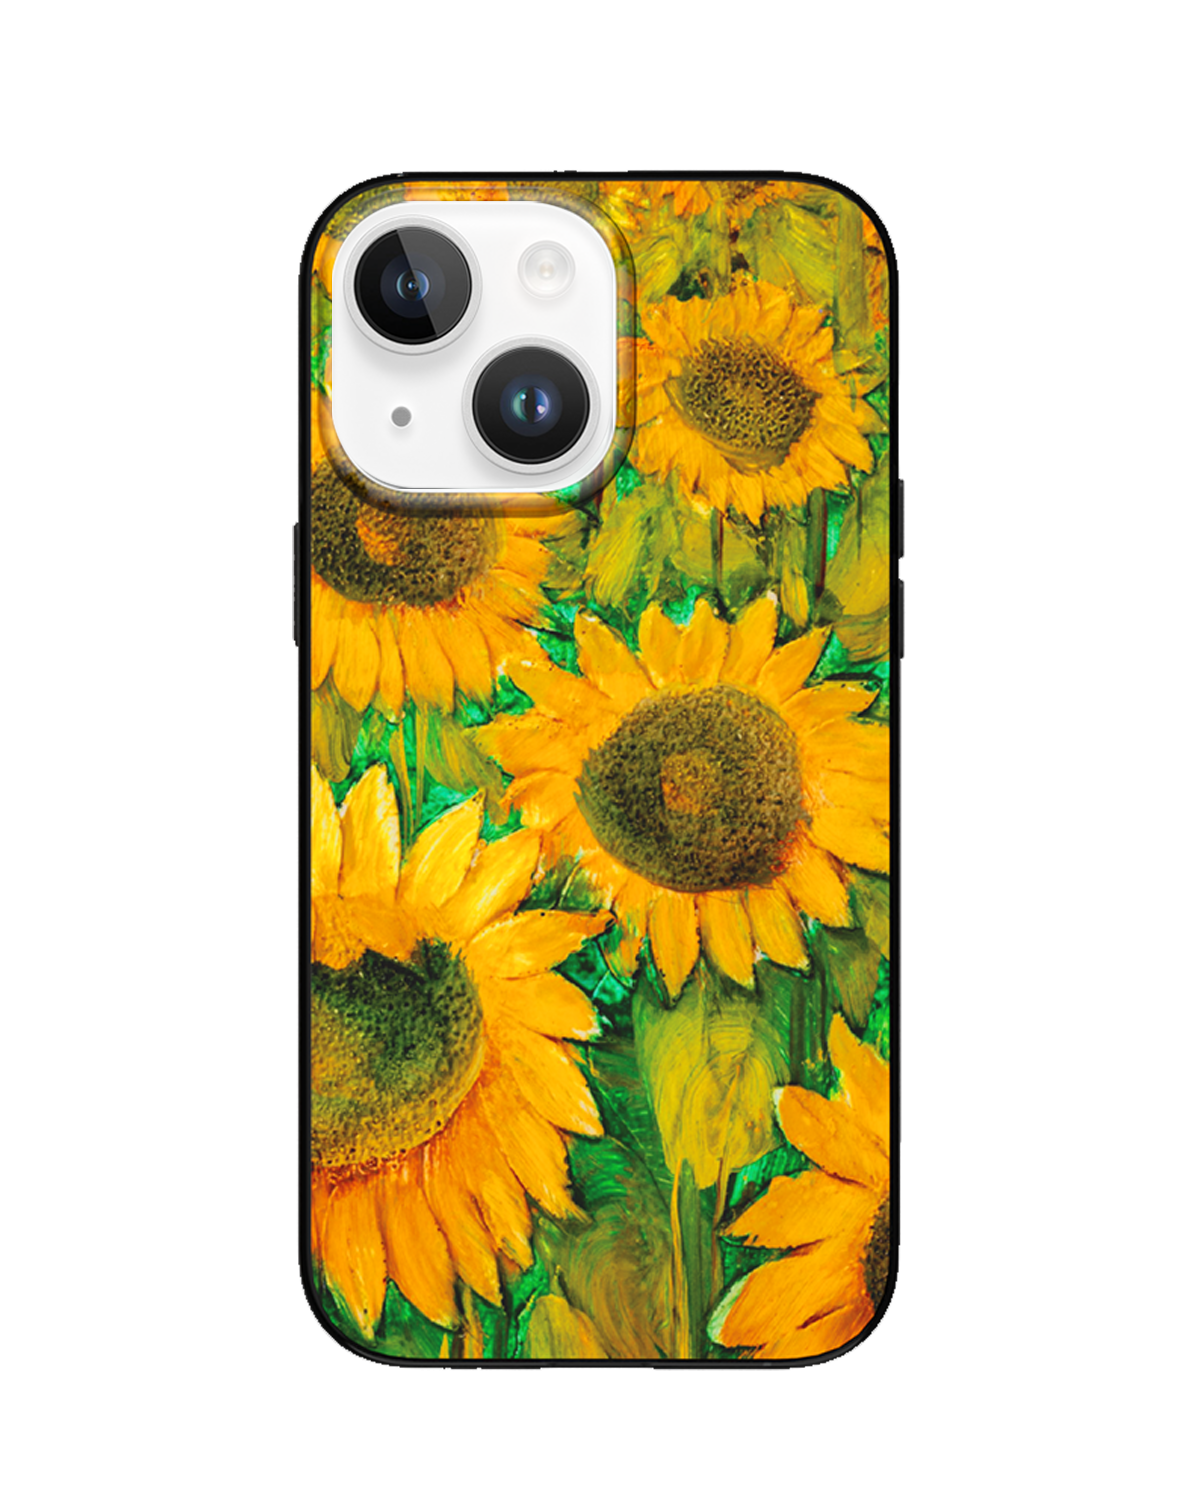 Sunflower Magnetic iPhone Case